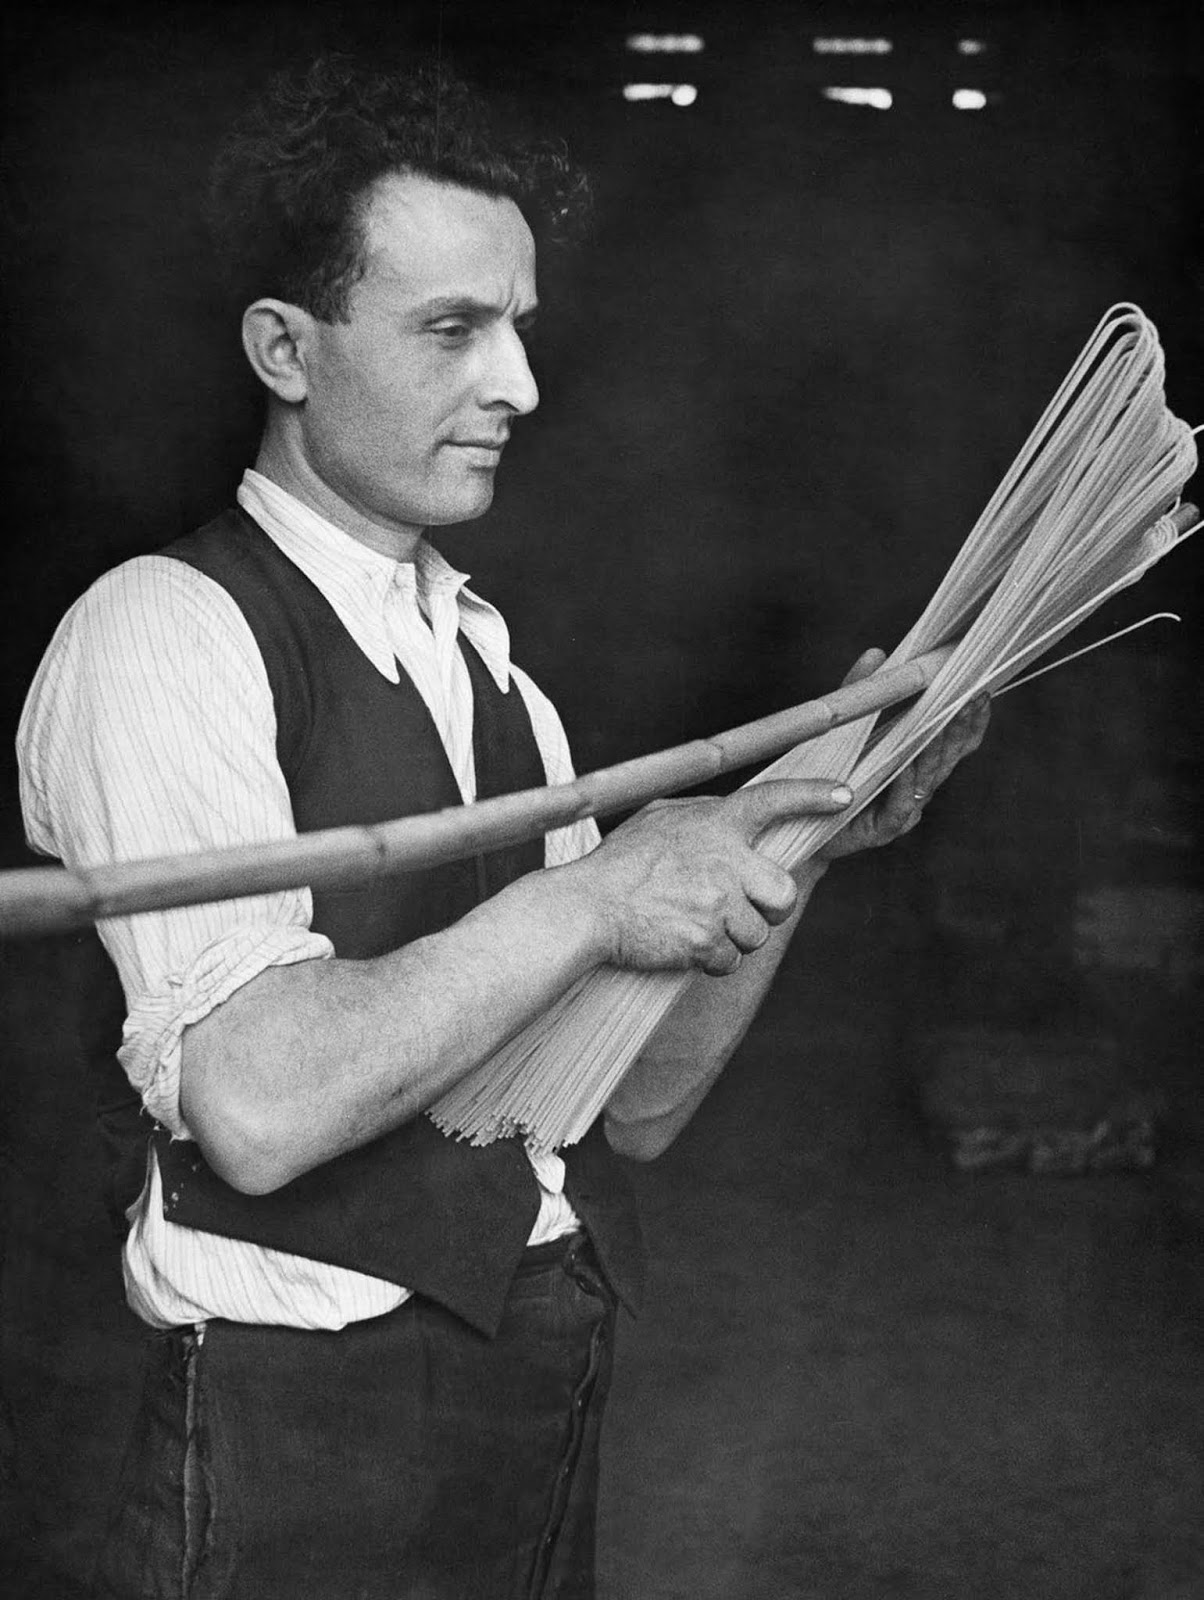 An Italian factory worker bends dried spaghetti with a stick. 1932.